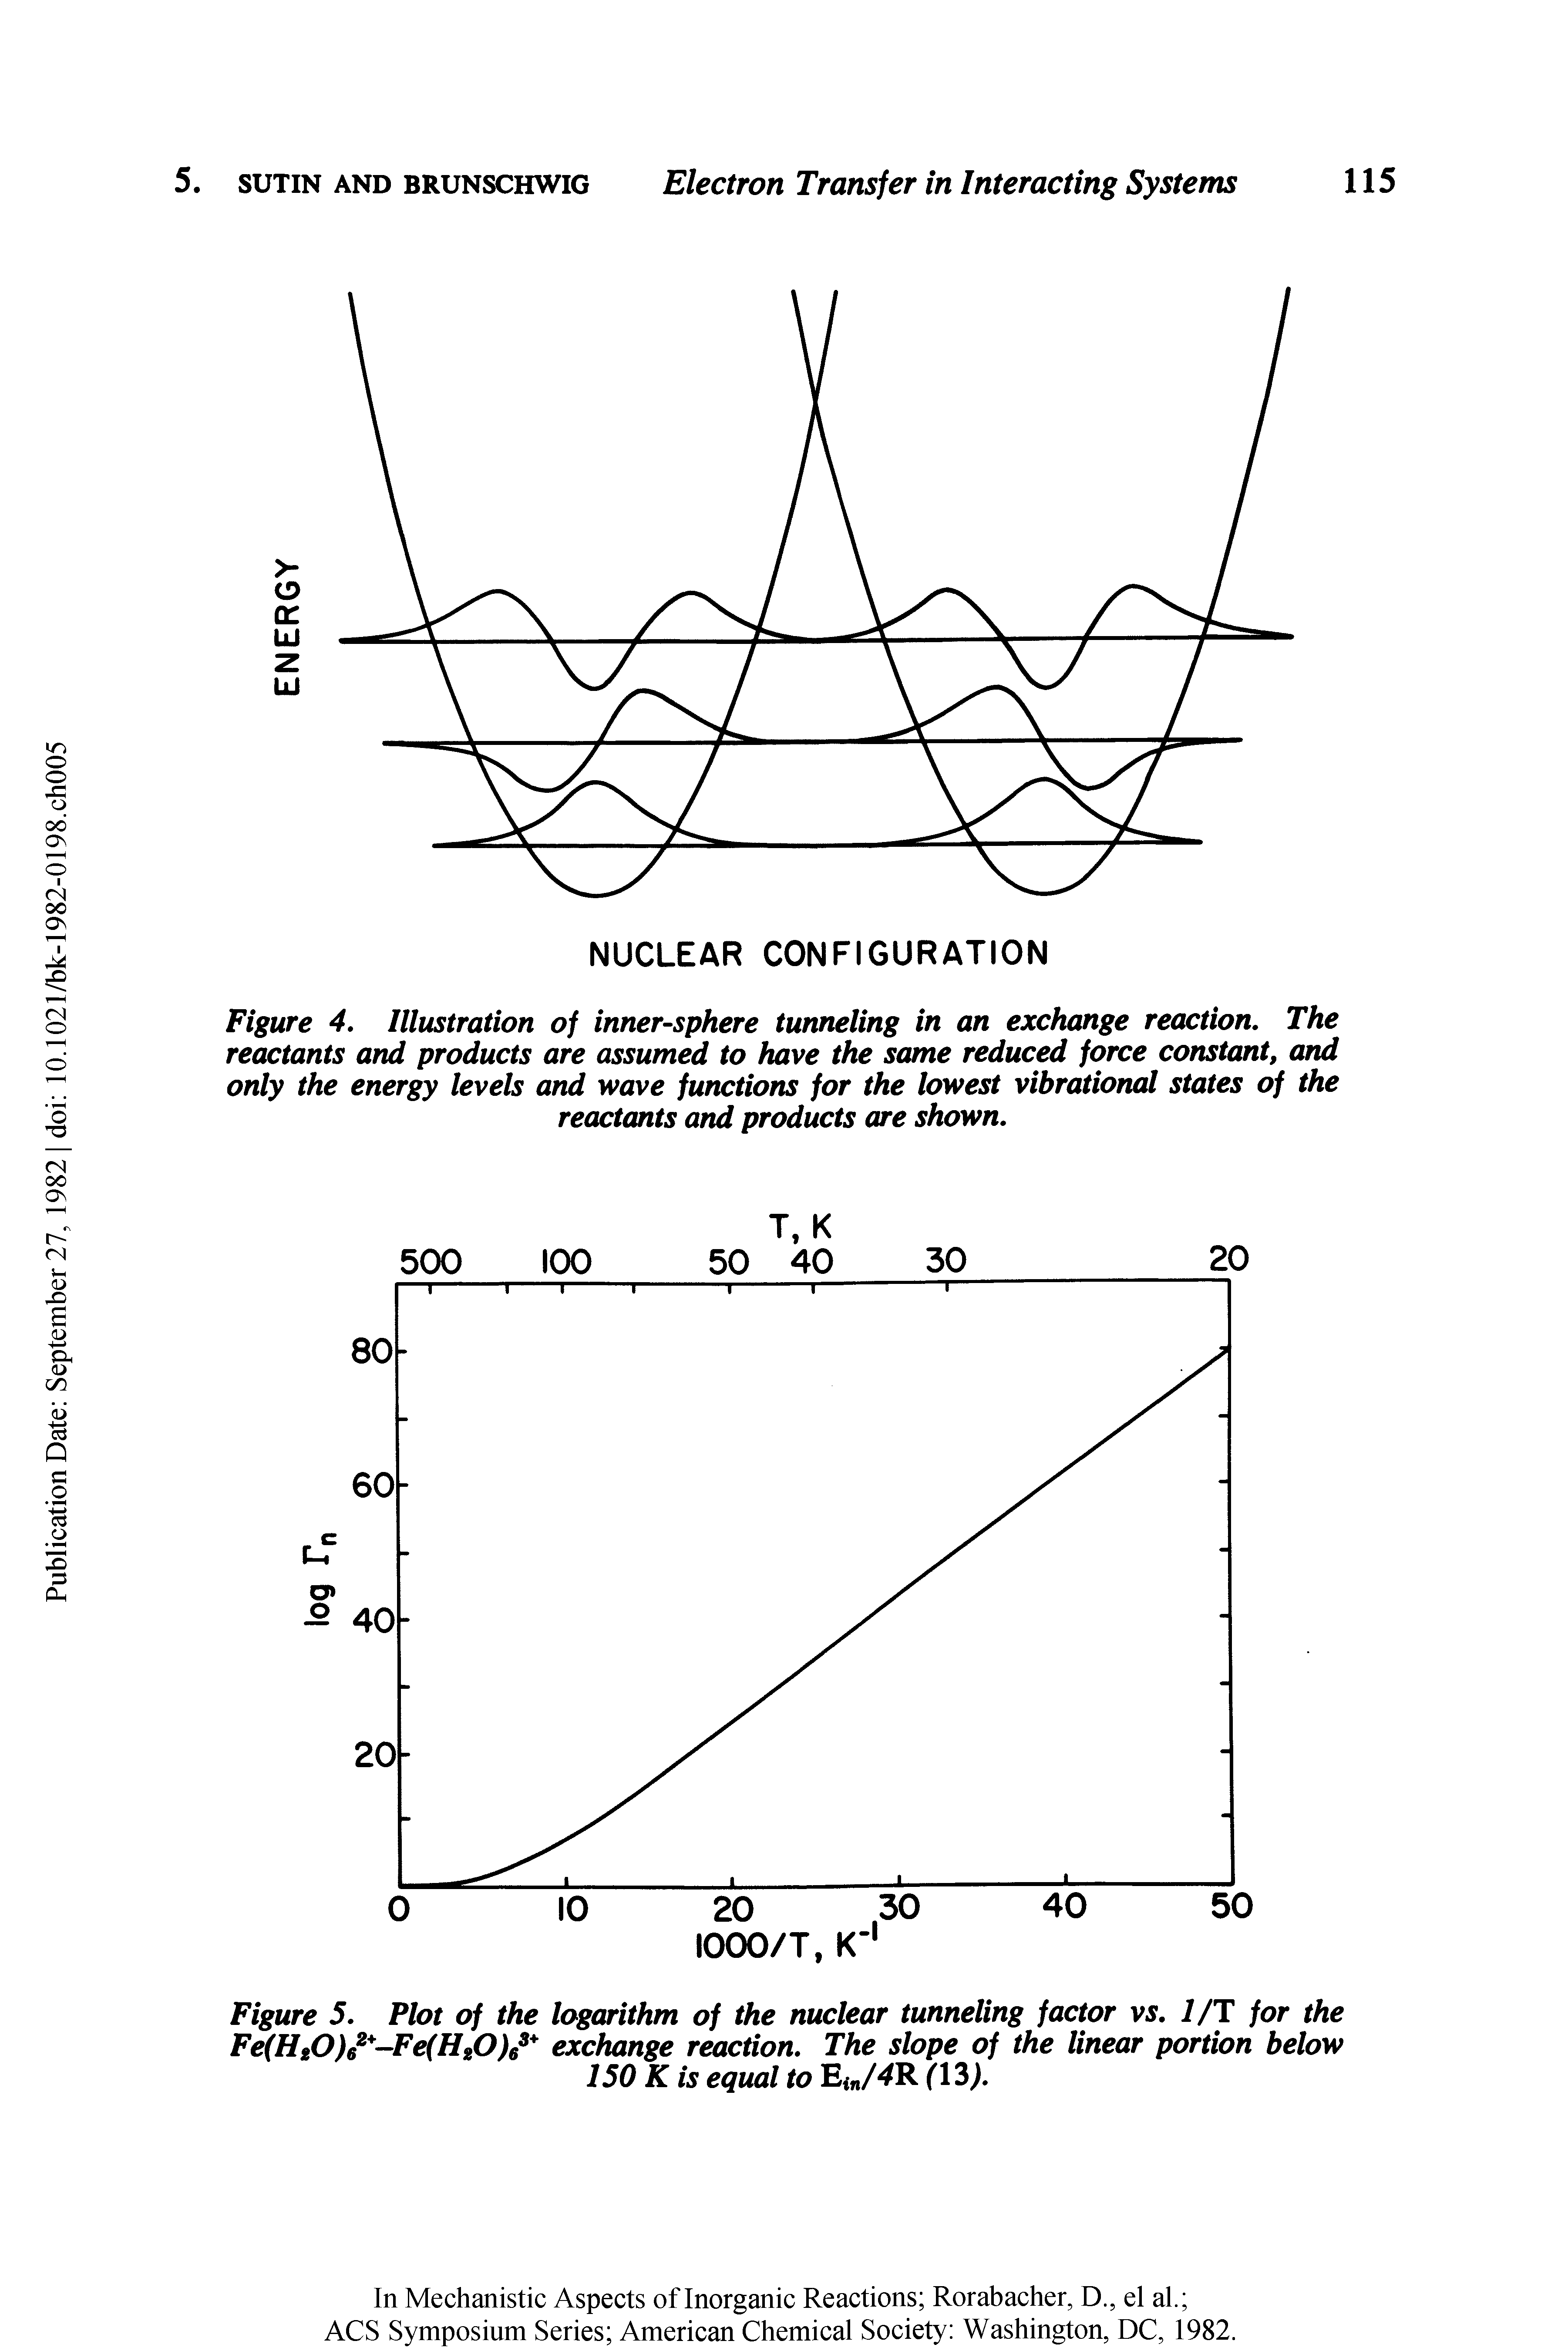 Figure 5. Plot of the logarithm of the nuclear tunneling factor vs. 1/T for the Fe(H20)62 -Fe(H20)63 exchange reaction. The slope of the linear portion below 150 K is equal to Ein/4R (13).